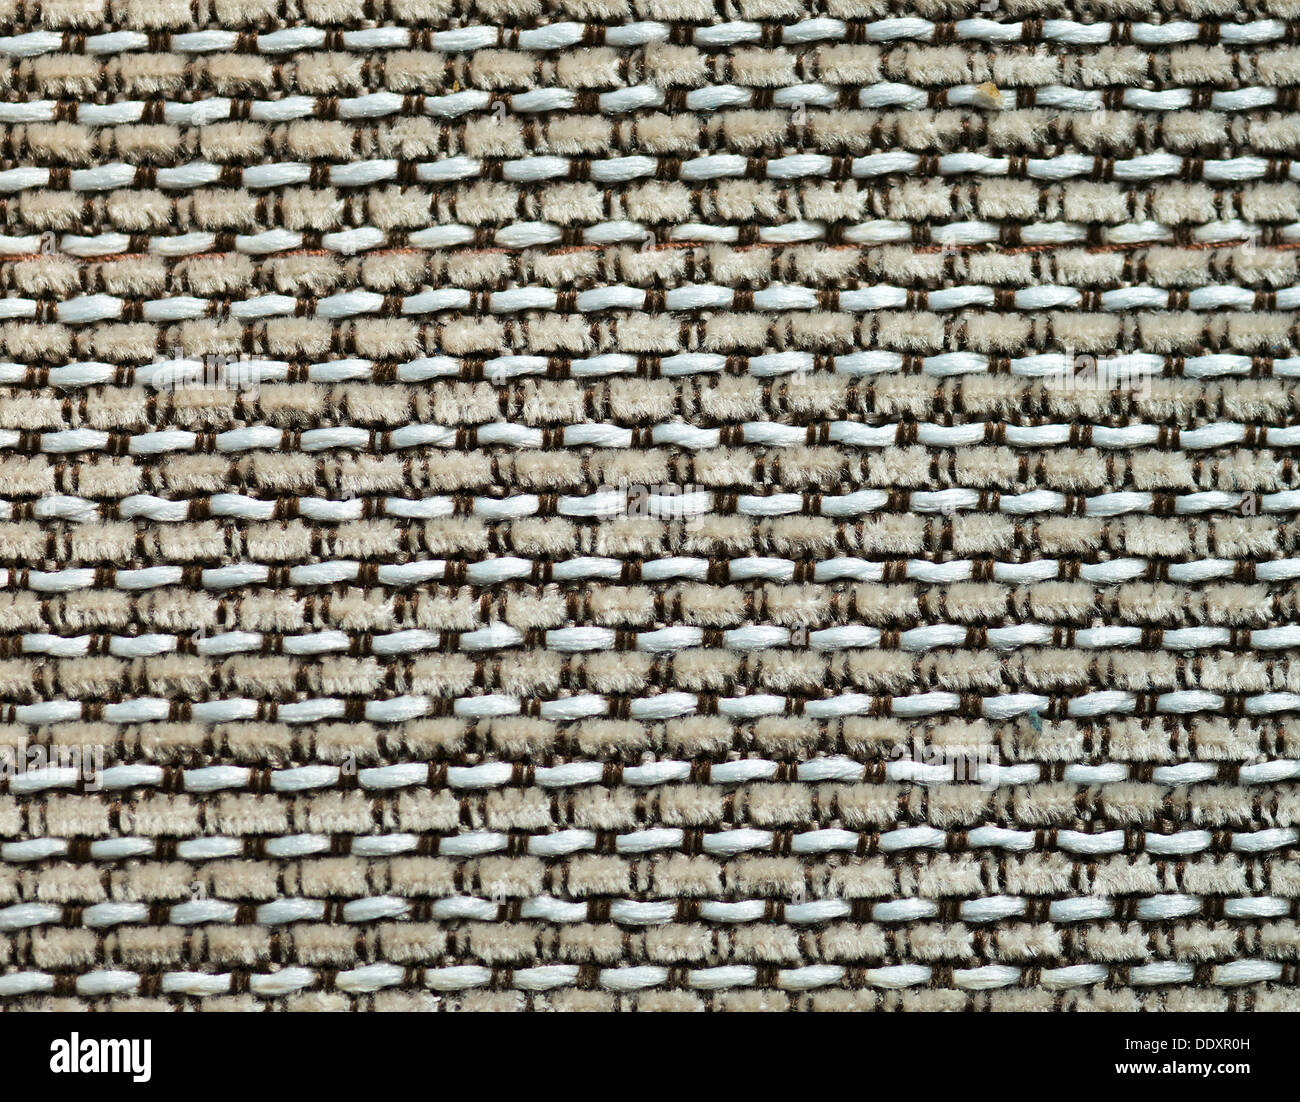 Fabric textile pattern texture background Stock Photo